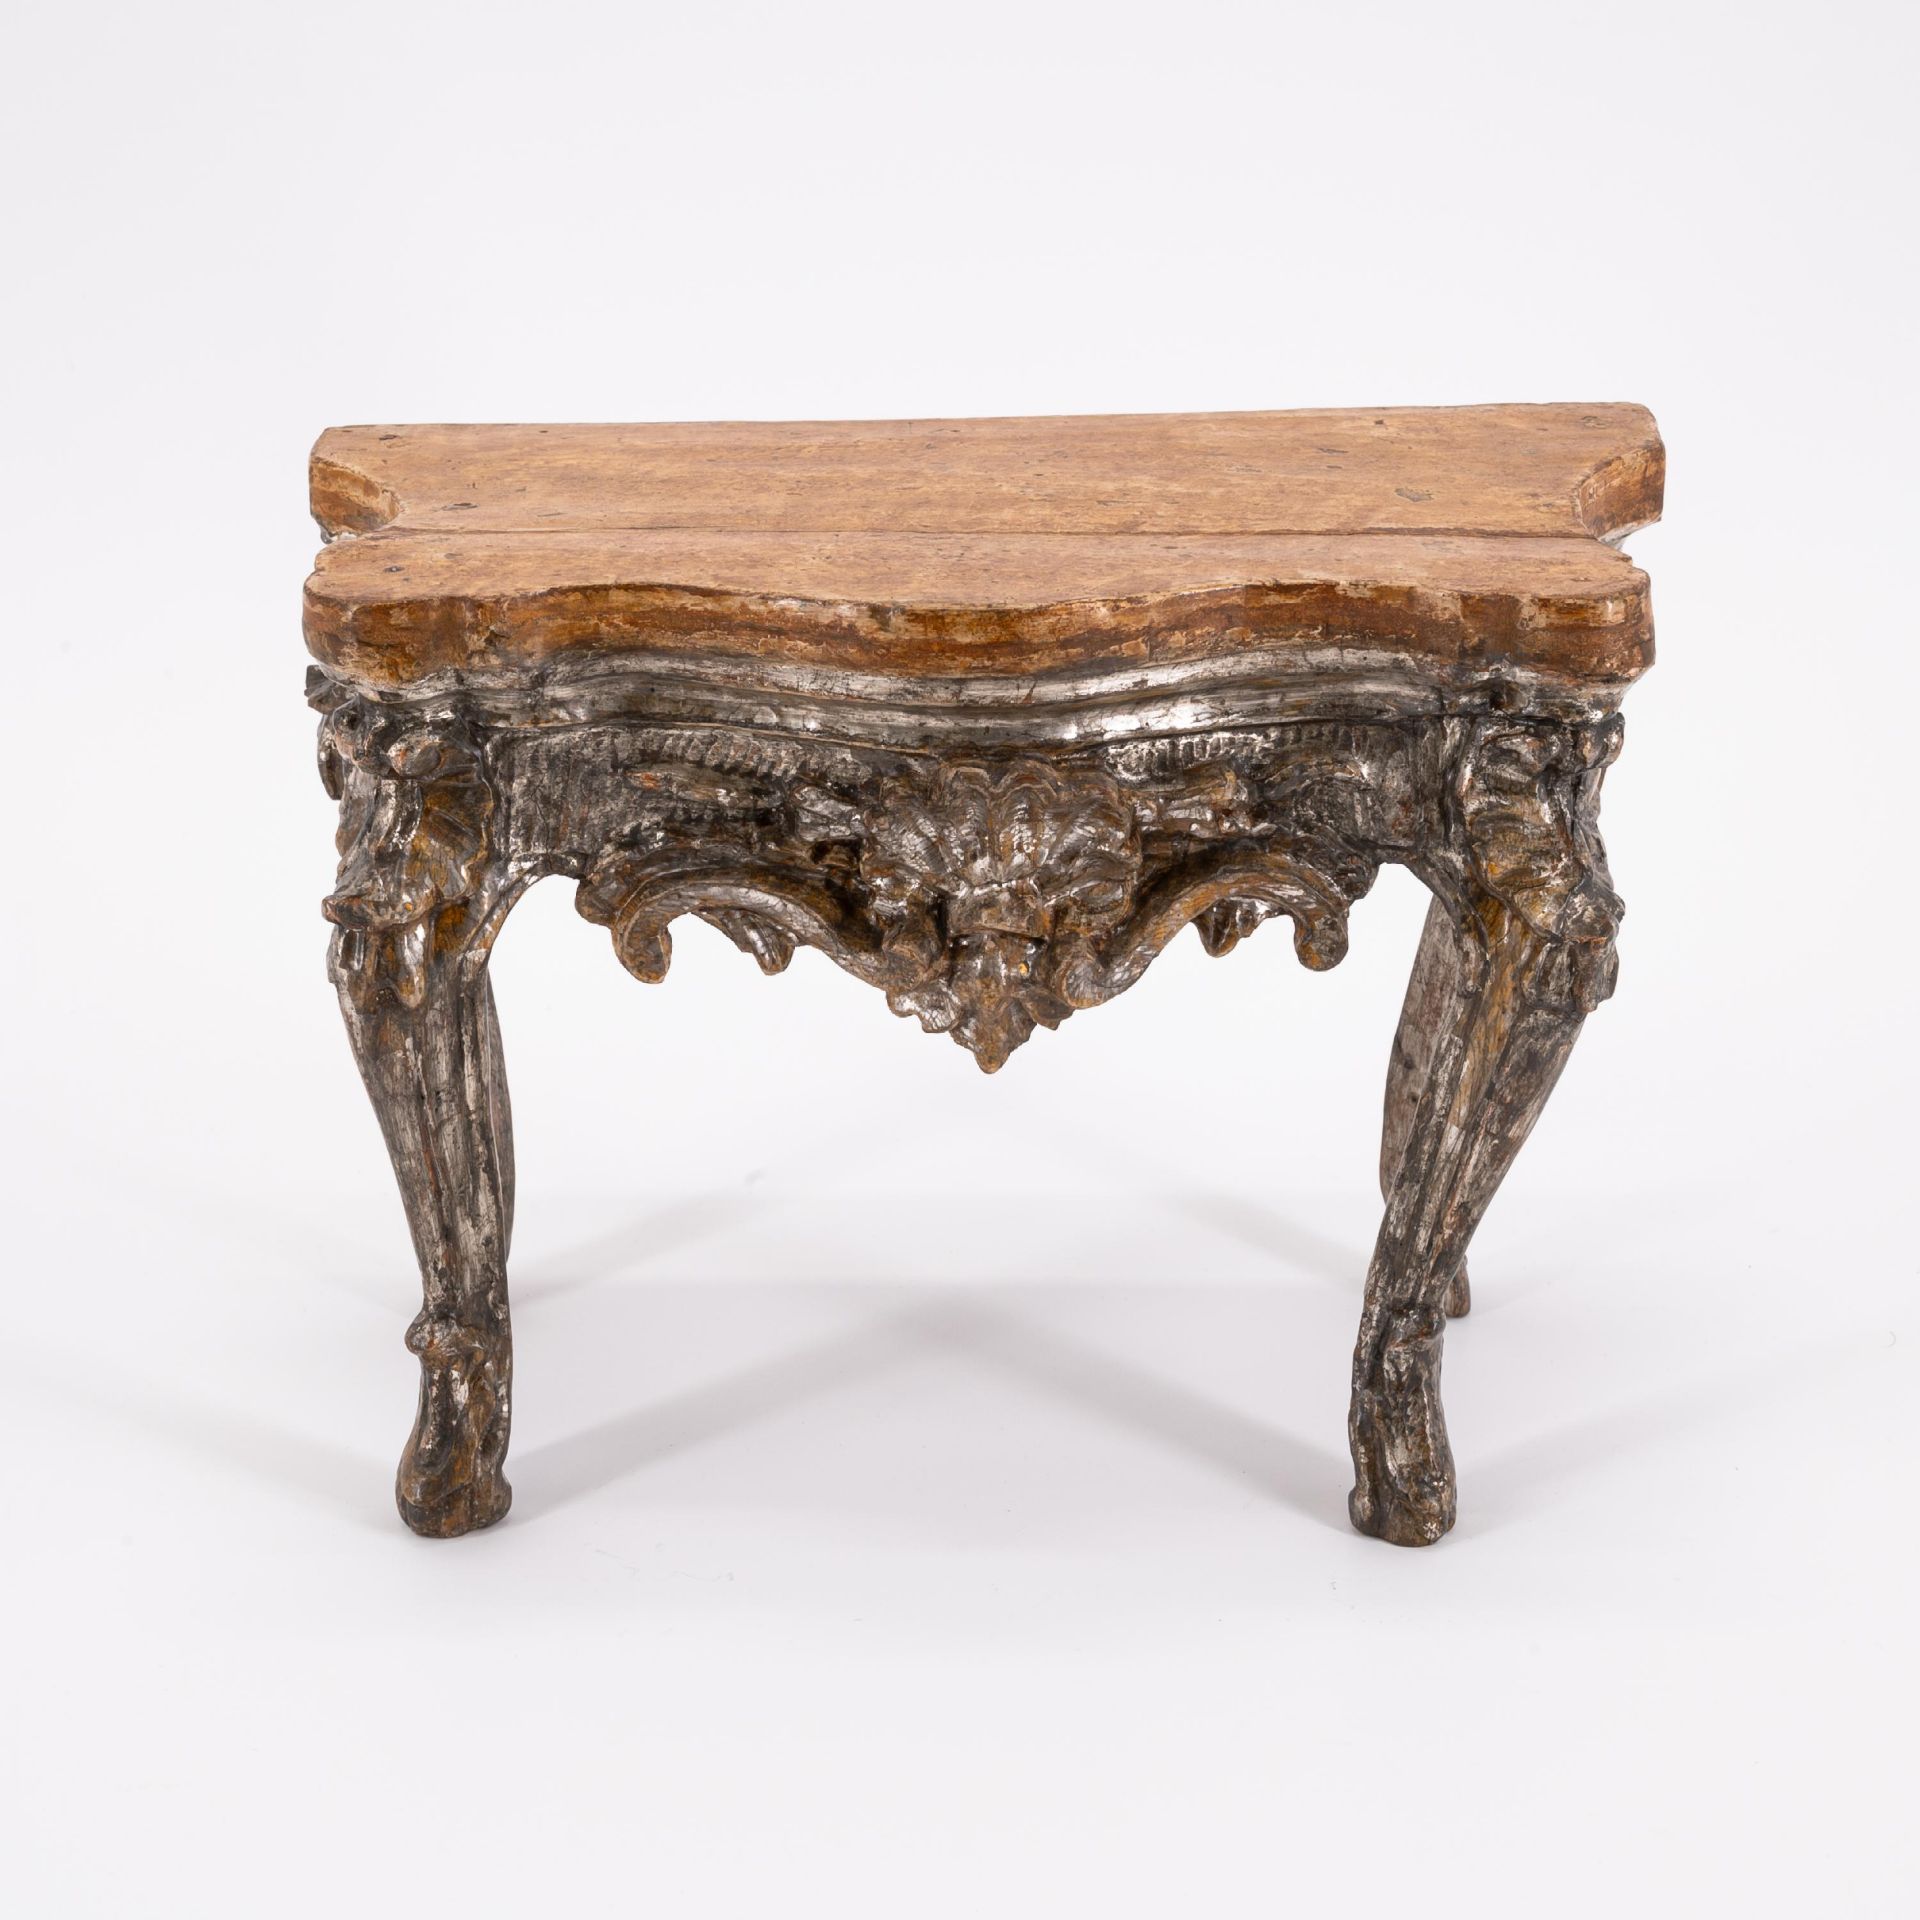 Venice: SMALL WOODEN MINIATURE CONSOLE TABLE WITH TROMPE L'OEUIL MARBLE PLATE - Image 3 of 6